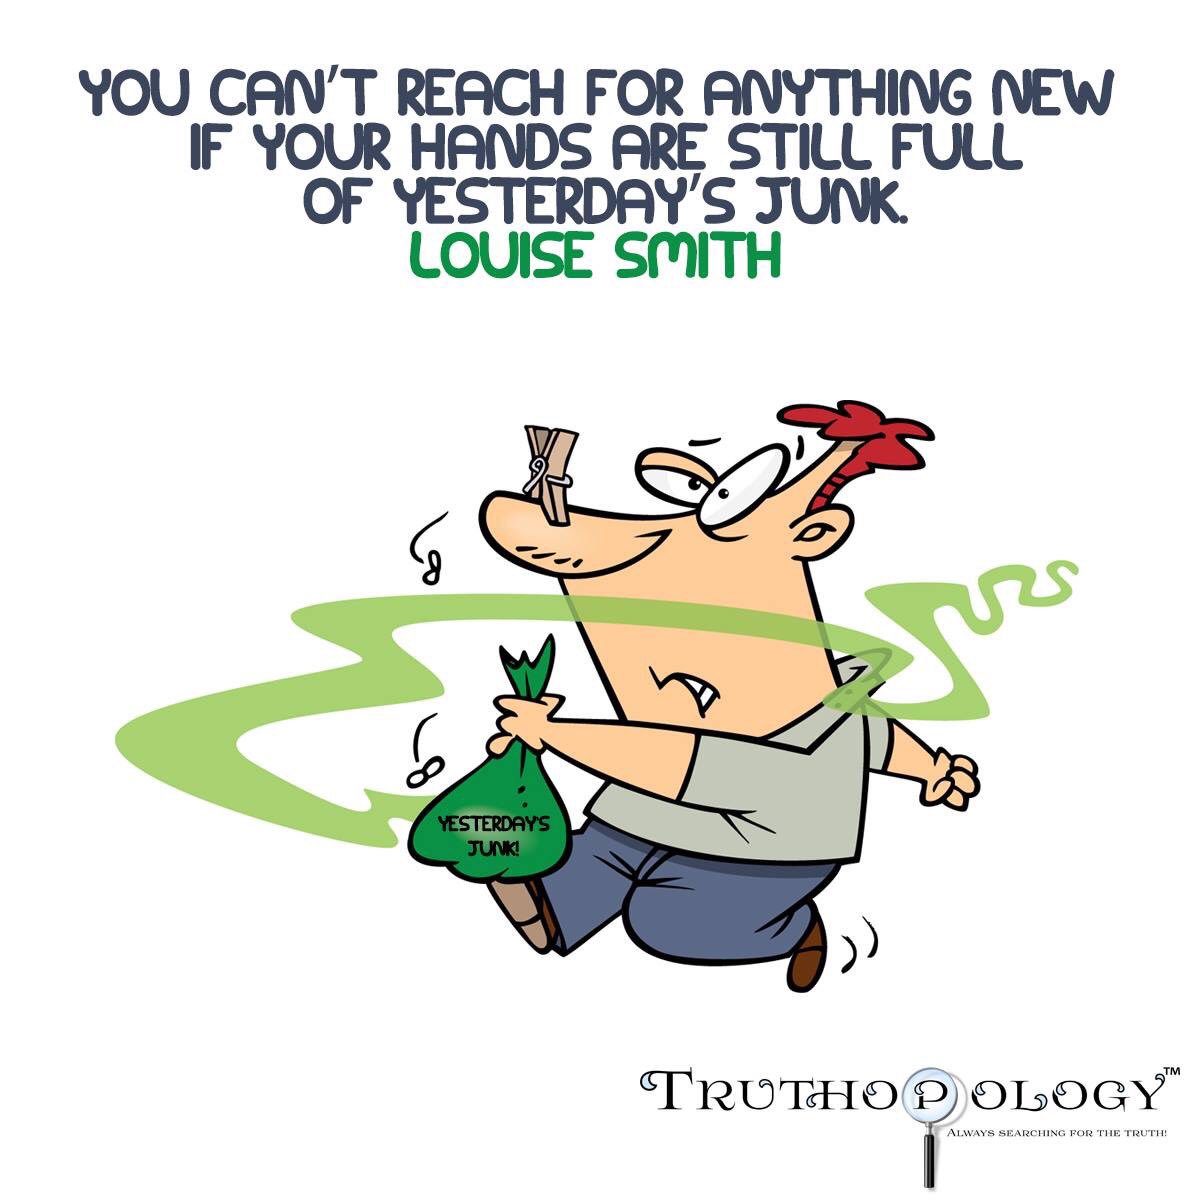 Yesterday's Junk!
#LouiseSmith #New #Beginning #Rise #Advance #Hope #Faith #Baggage #Burdens #Impediments #Yesterday #Tomorrow #NewDay #KeepGoing #LetGo #Past #LeaveThePastBehind #Junk #Truth #Search #Truthopology